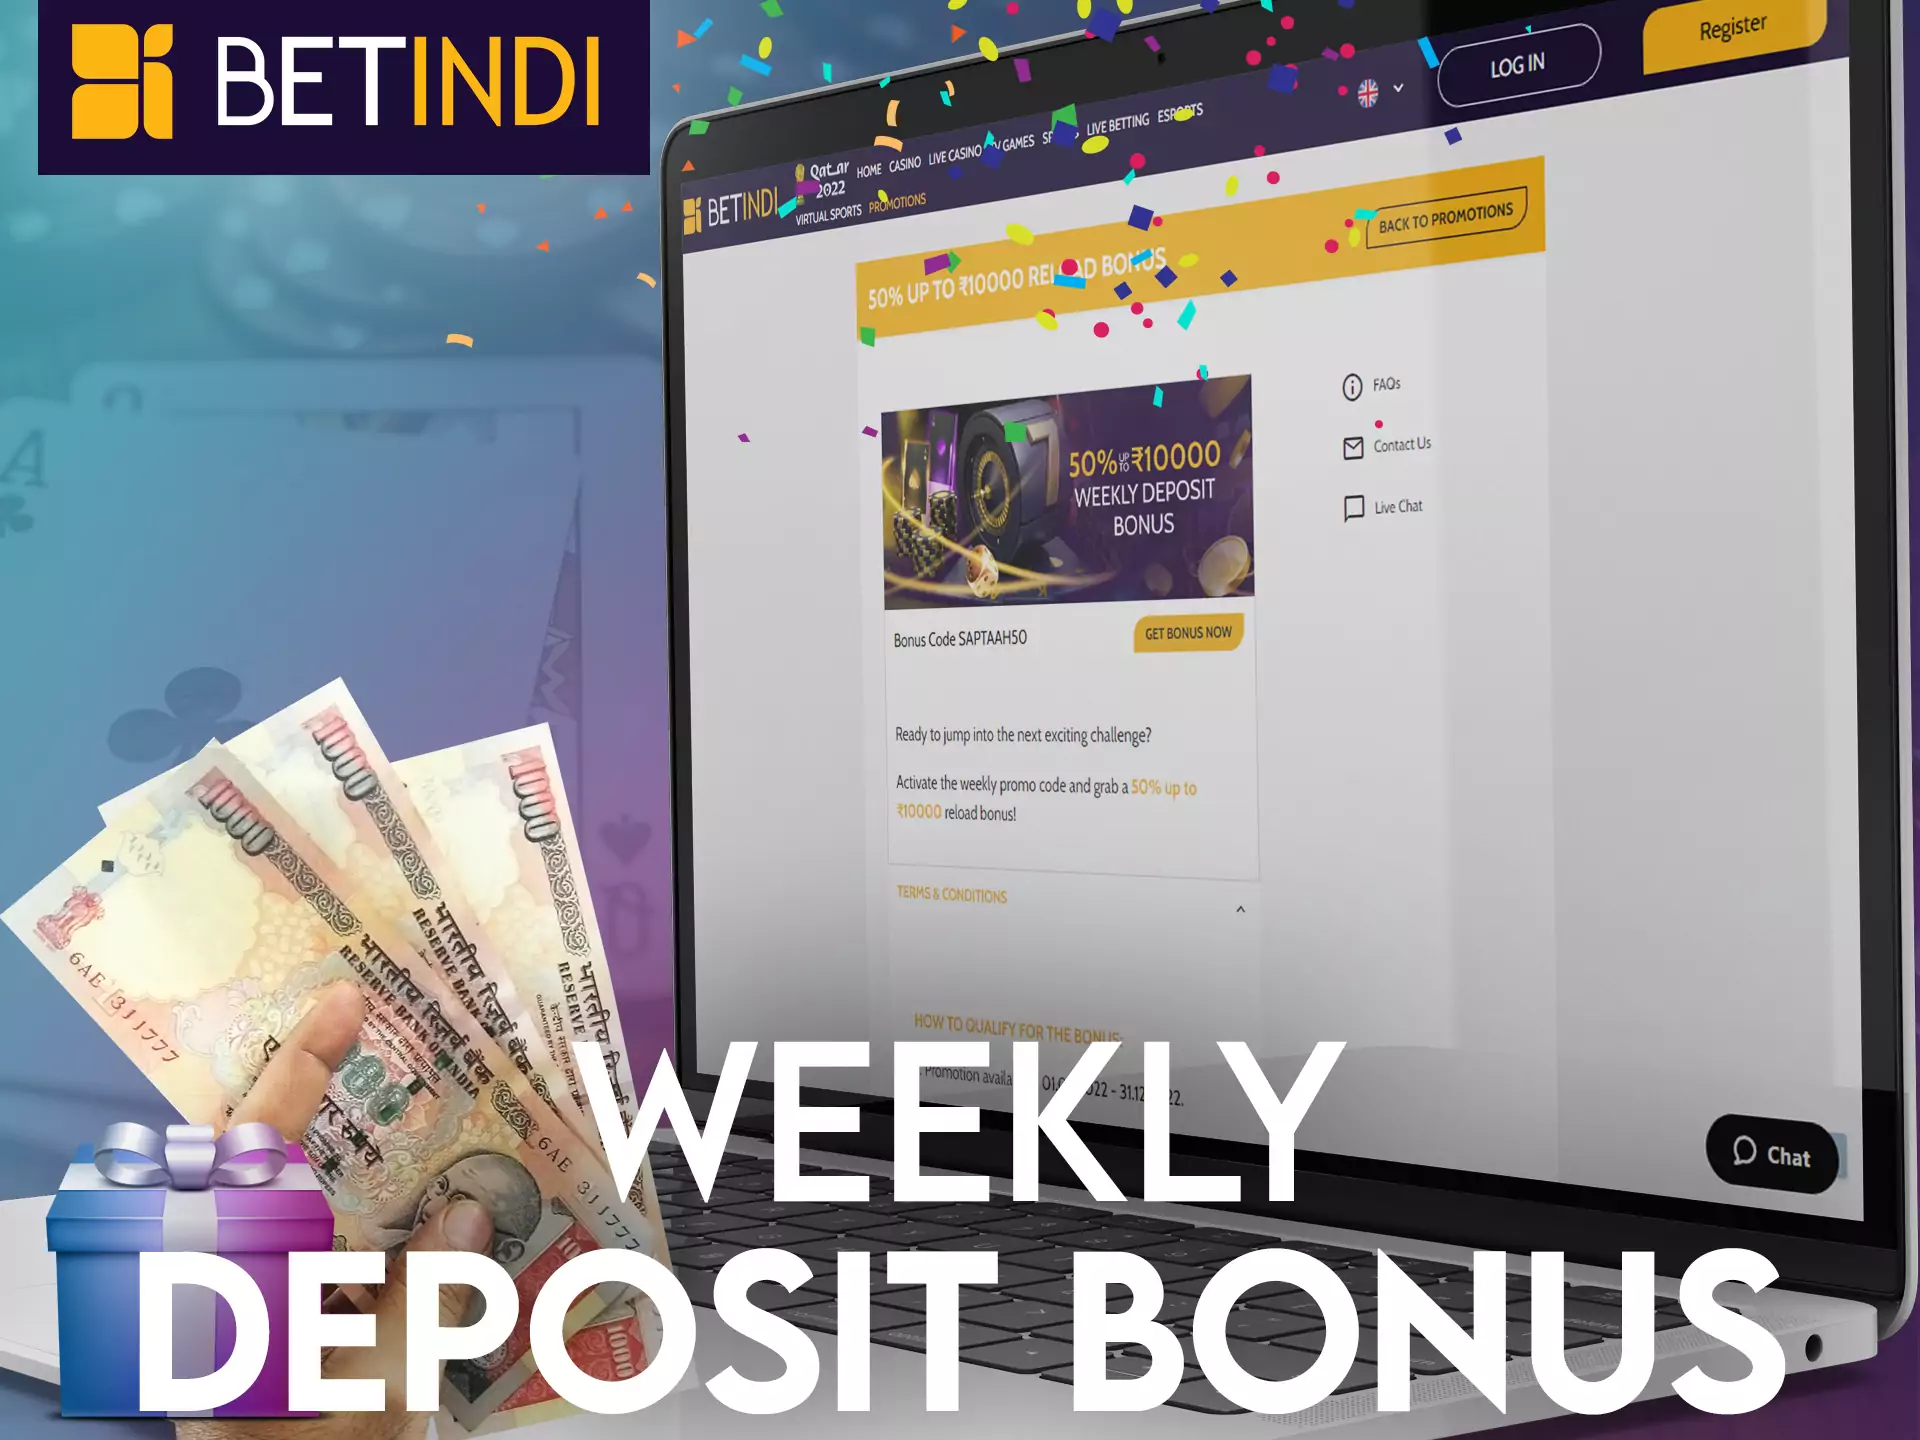 Get a weekly deposit bonus from Betindi and get the benefits.